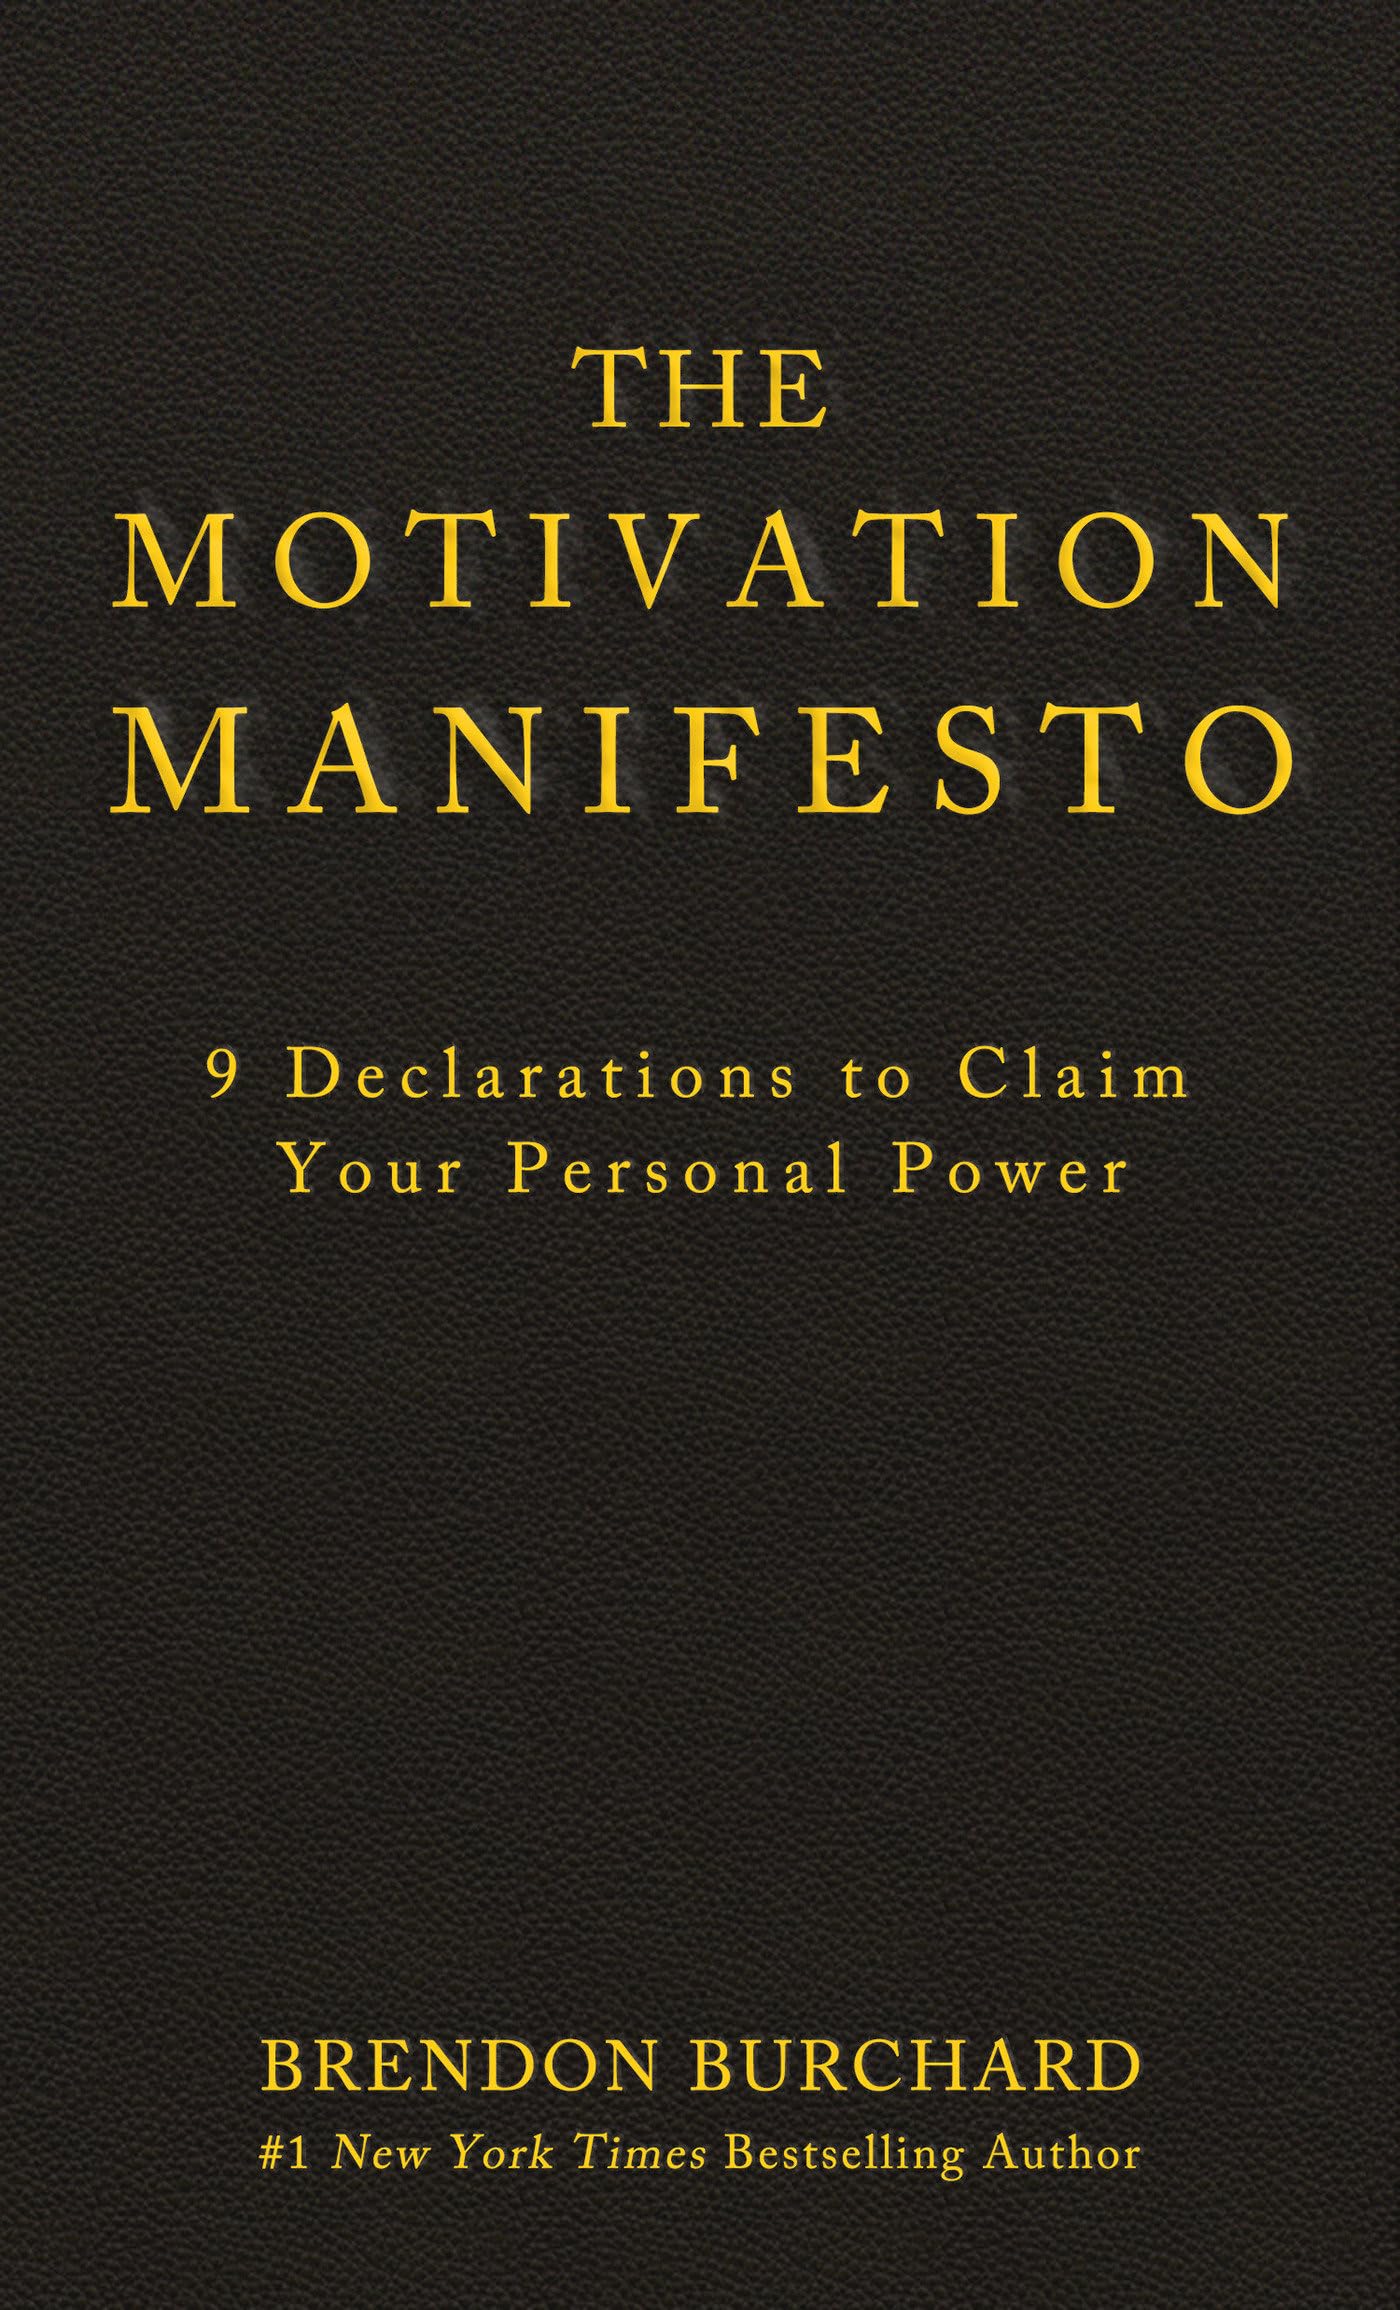 Motivation Manifesto: 9 Declarations to Claim Your Personal Power